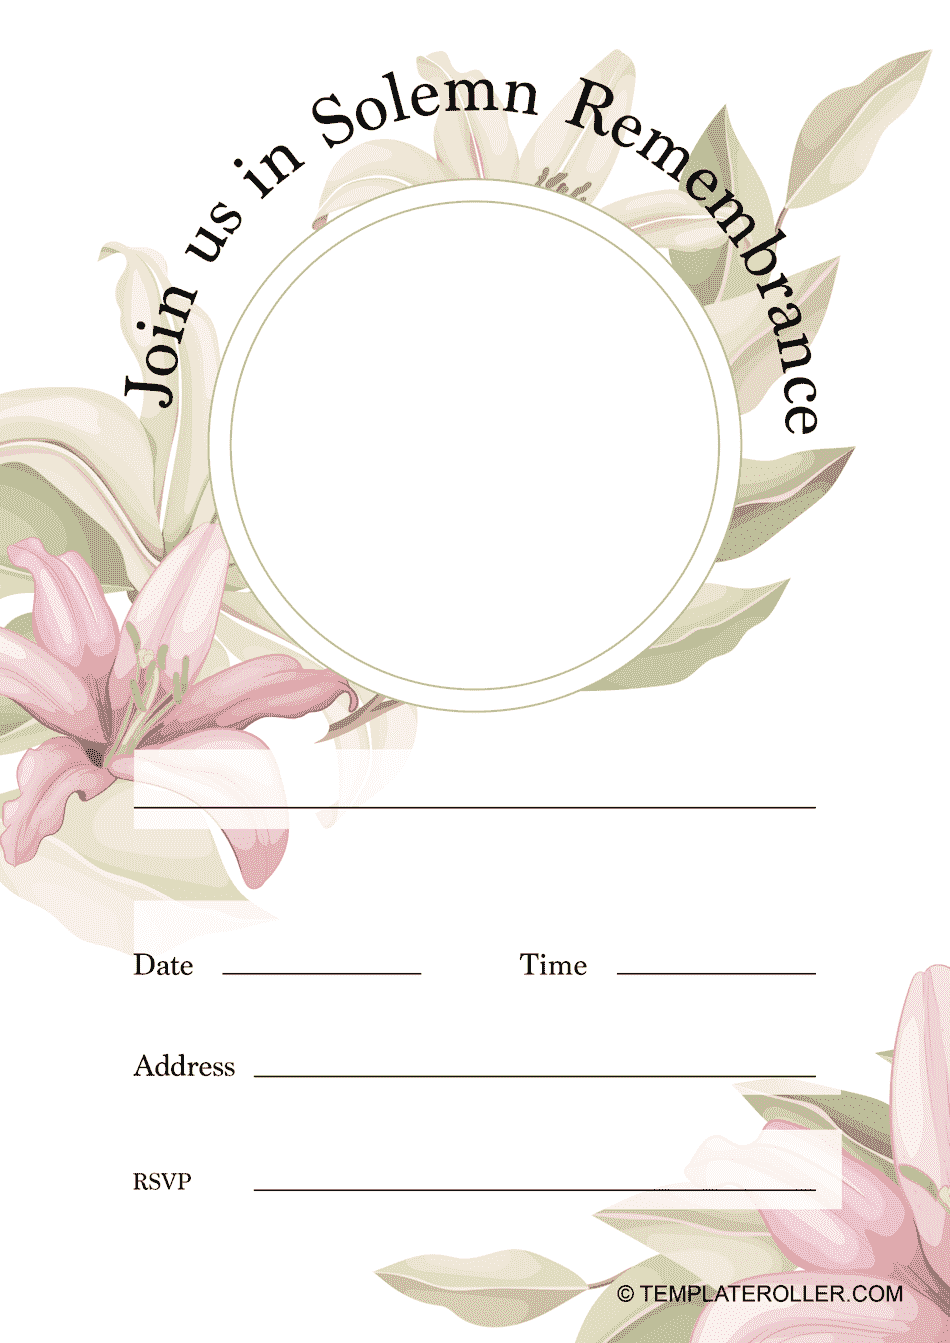 Funeral Invitation - Flower Template | Customize and Personalize